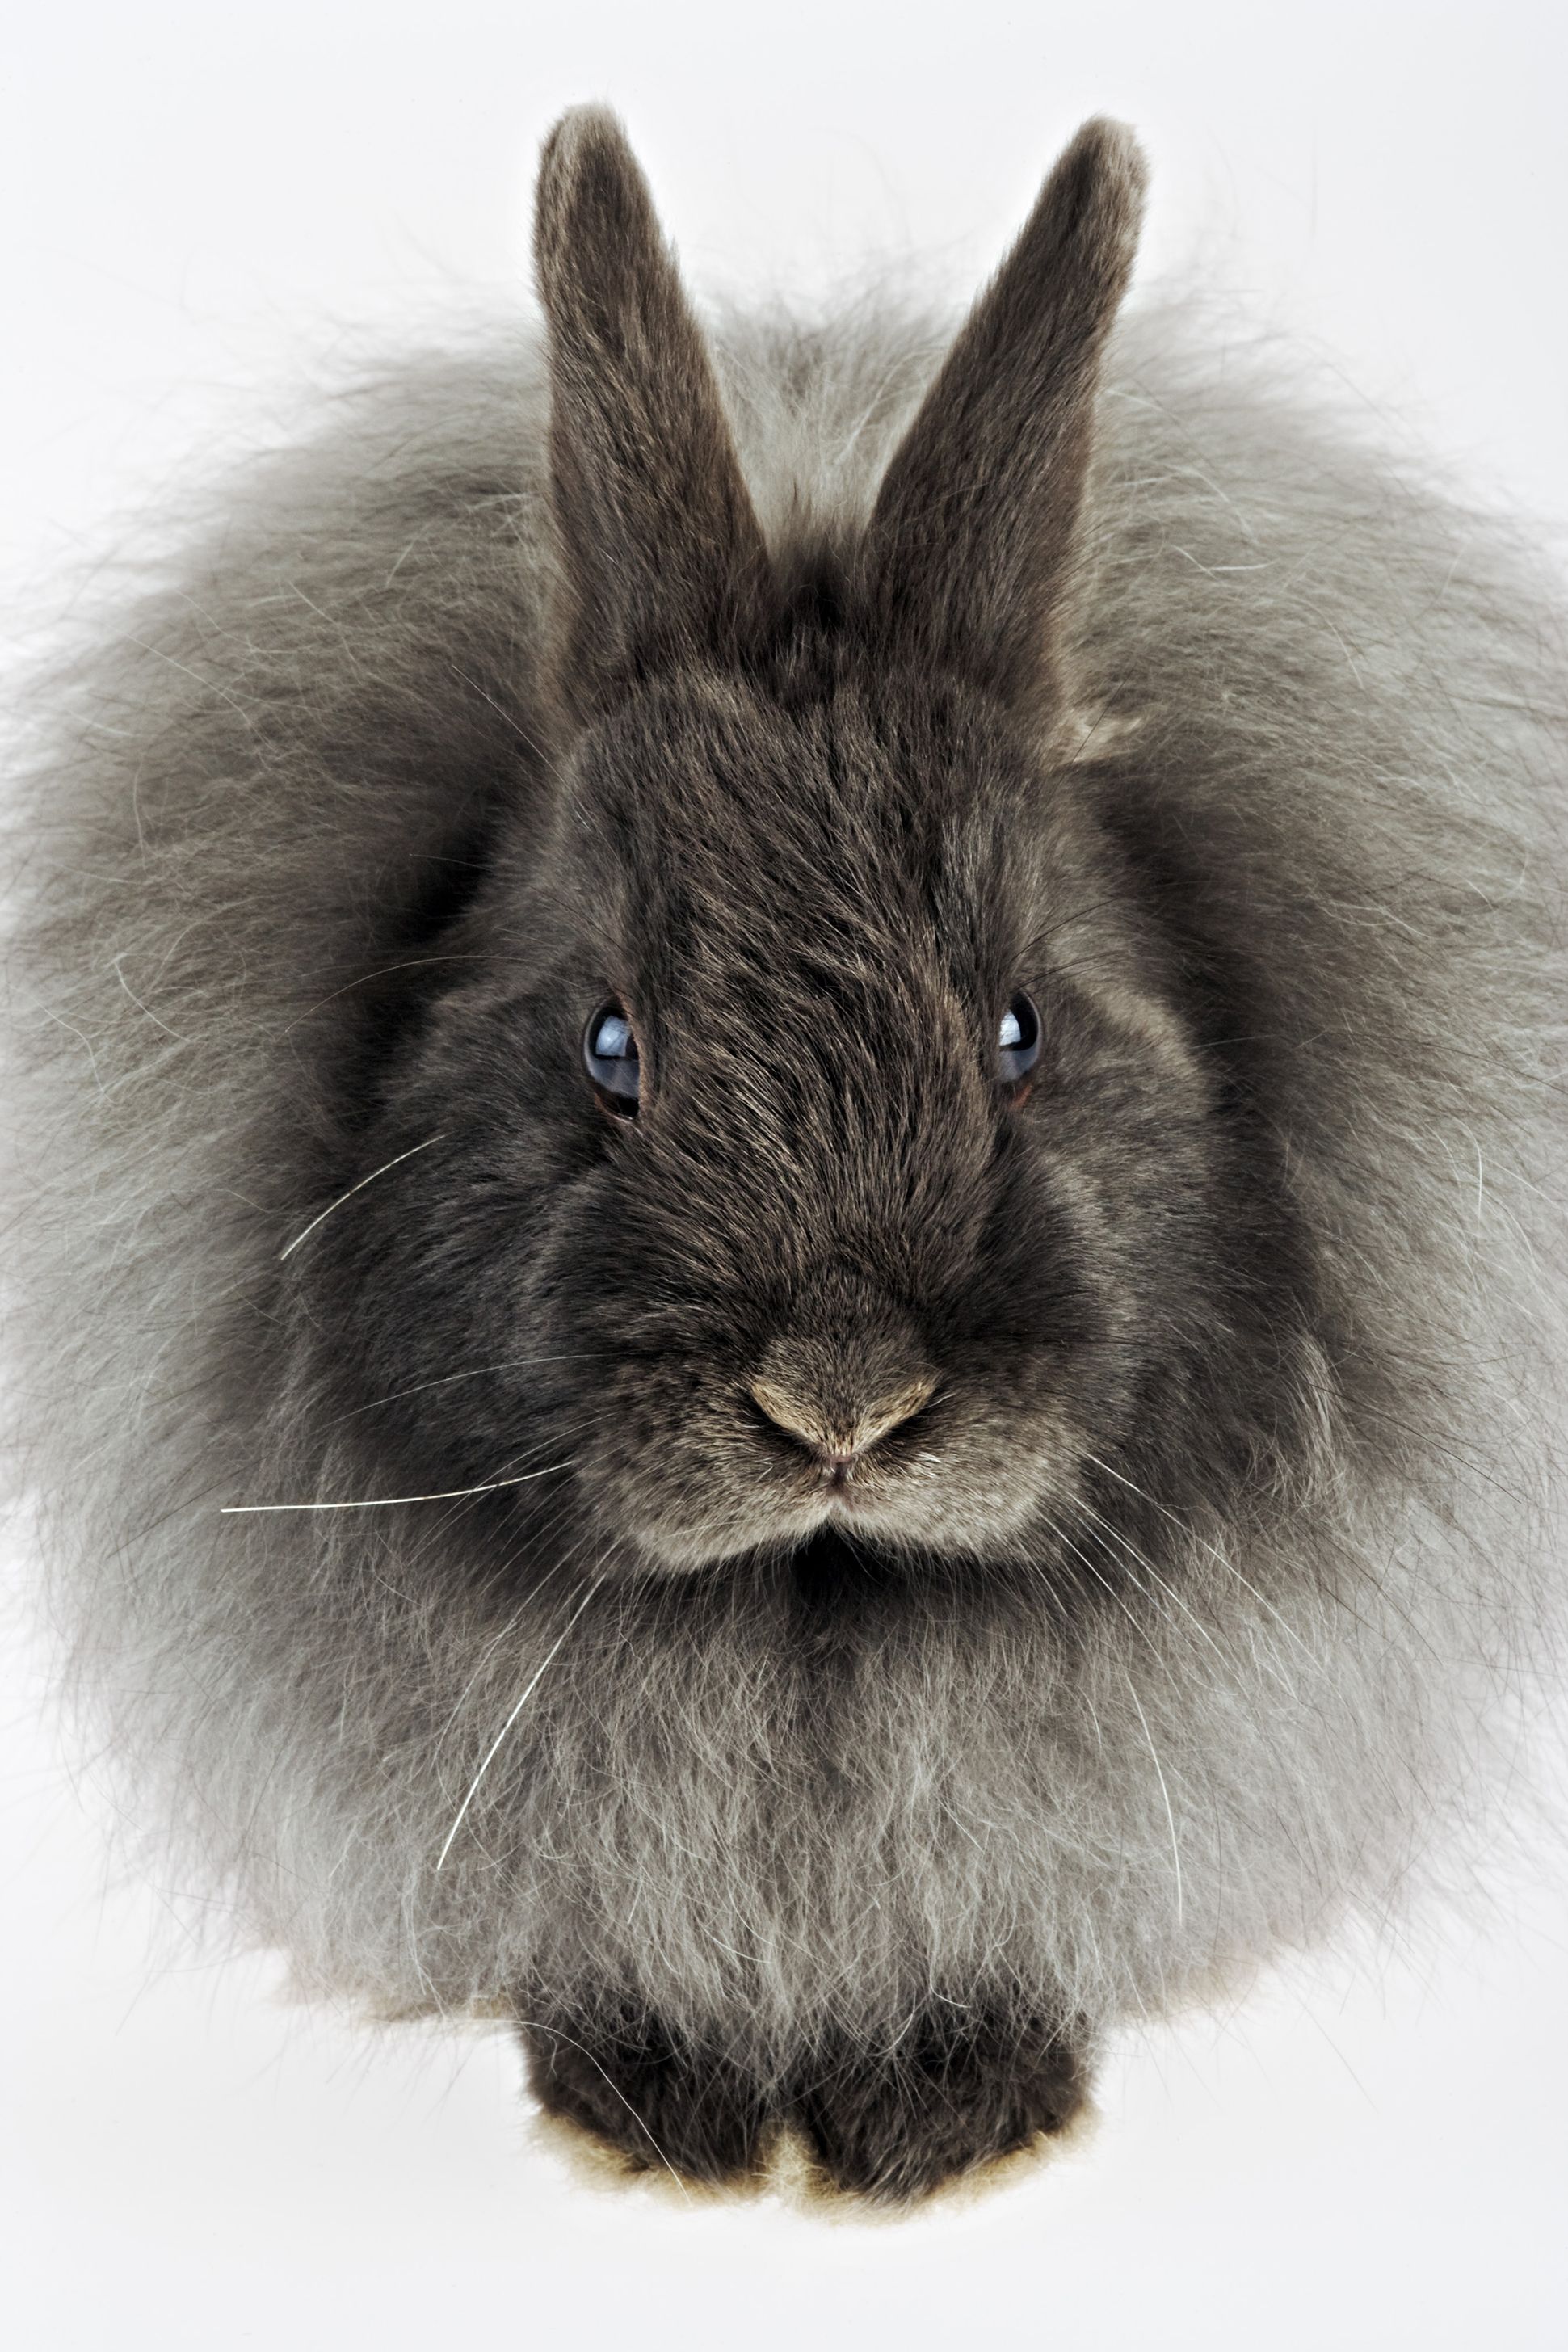 The 15 Best Rabbit Breeds - A Complete Breed Guide to Adopting a Bunny